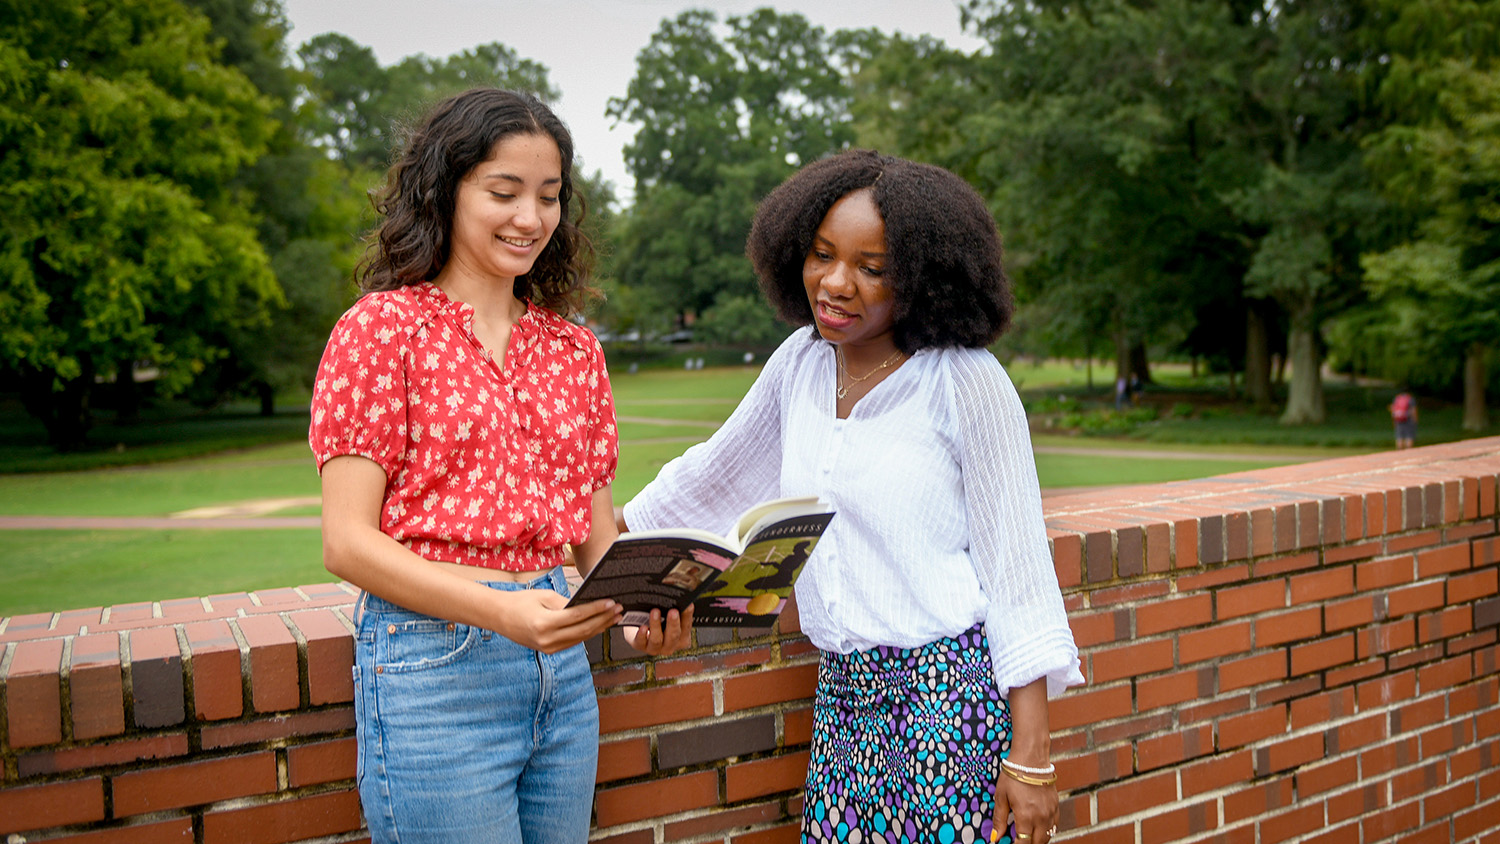 MFA students read a book on the Court of North Carolina